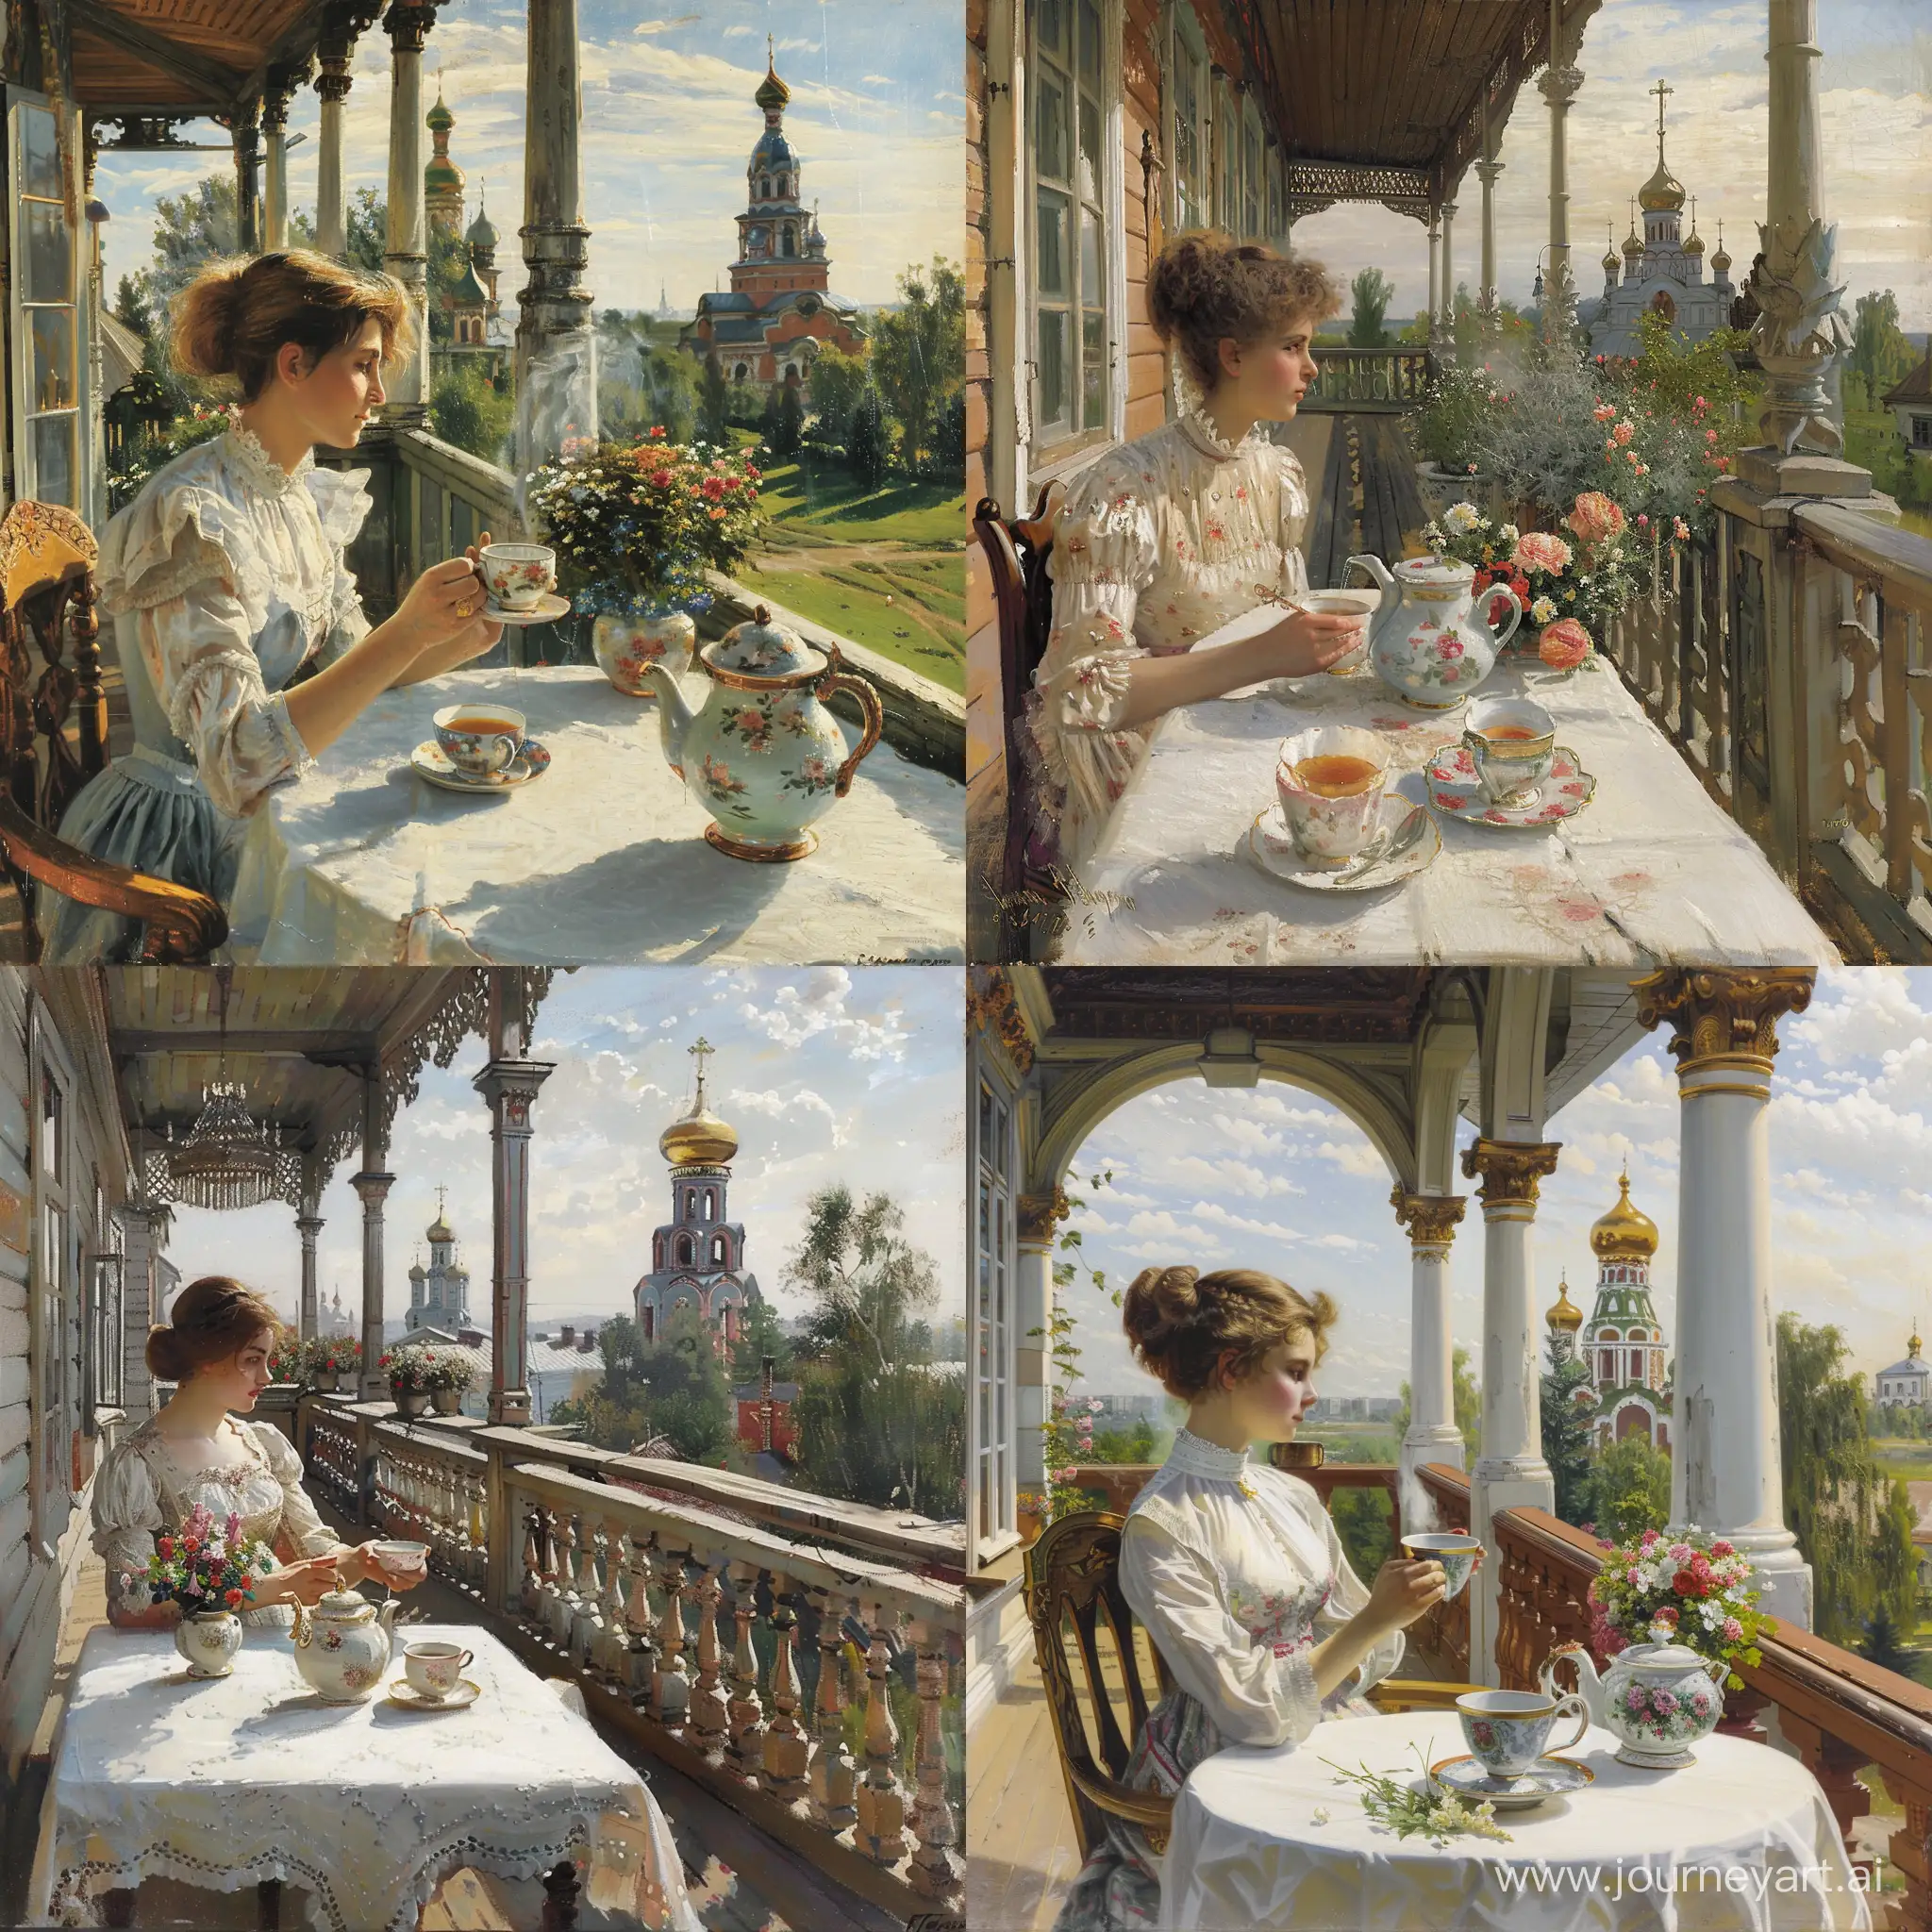 XIX century in the Russian Empire. on the veranda of the estate at the table sits a woman, turned sideways, holding a cup of tea. On the table is a white tablecloth, a porcelain teapot, flowers. In the background in the distance church